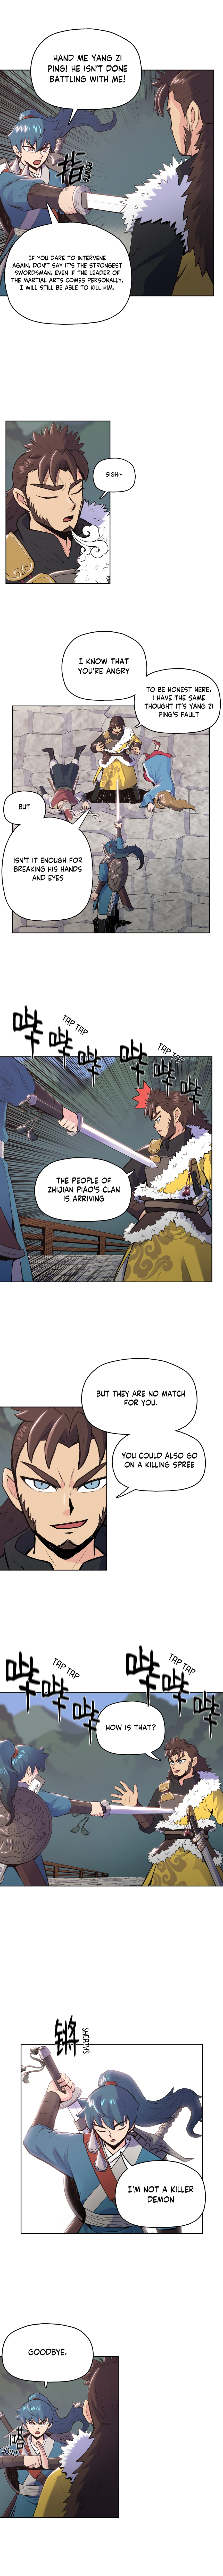 The God Of War - 8 page 4